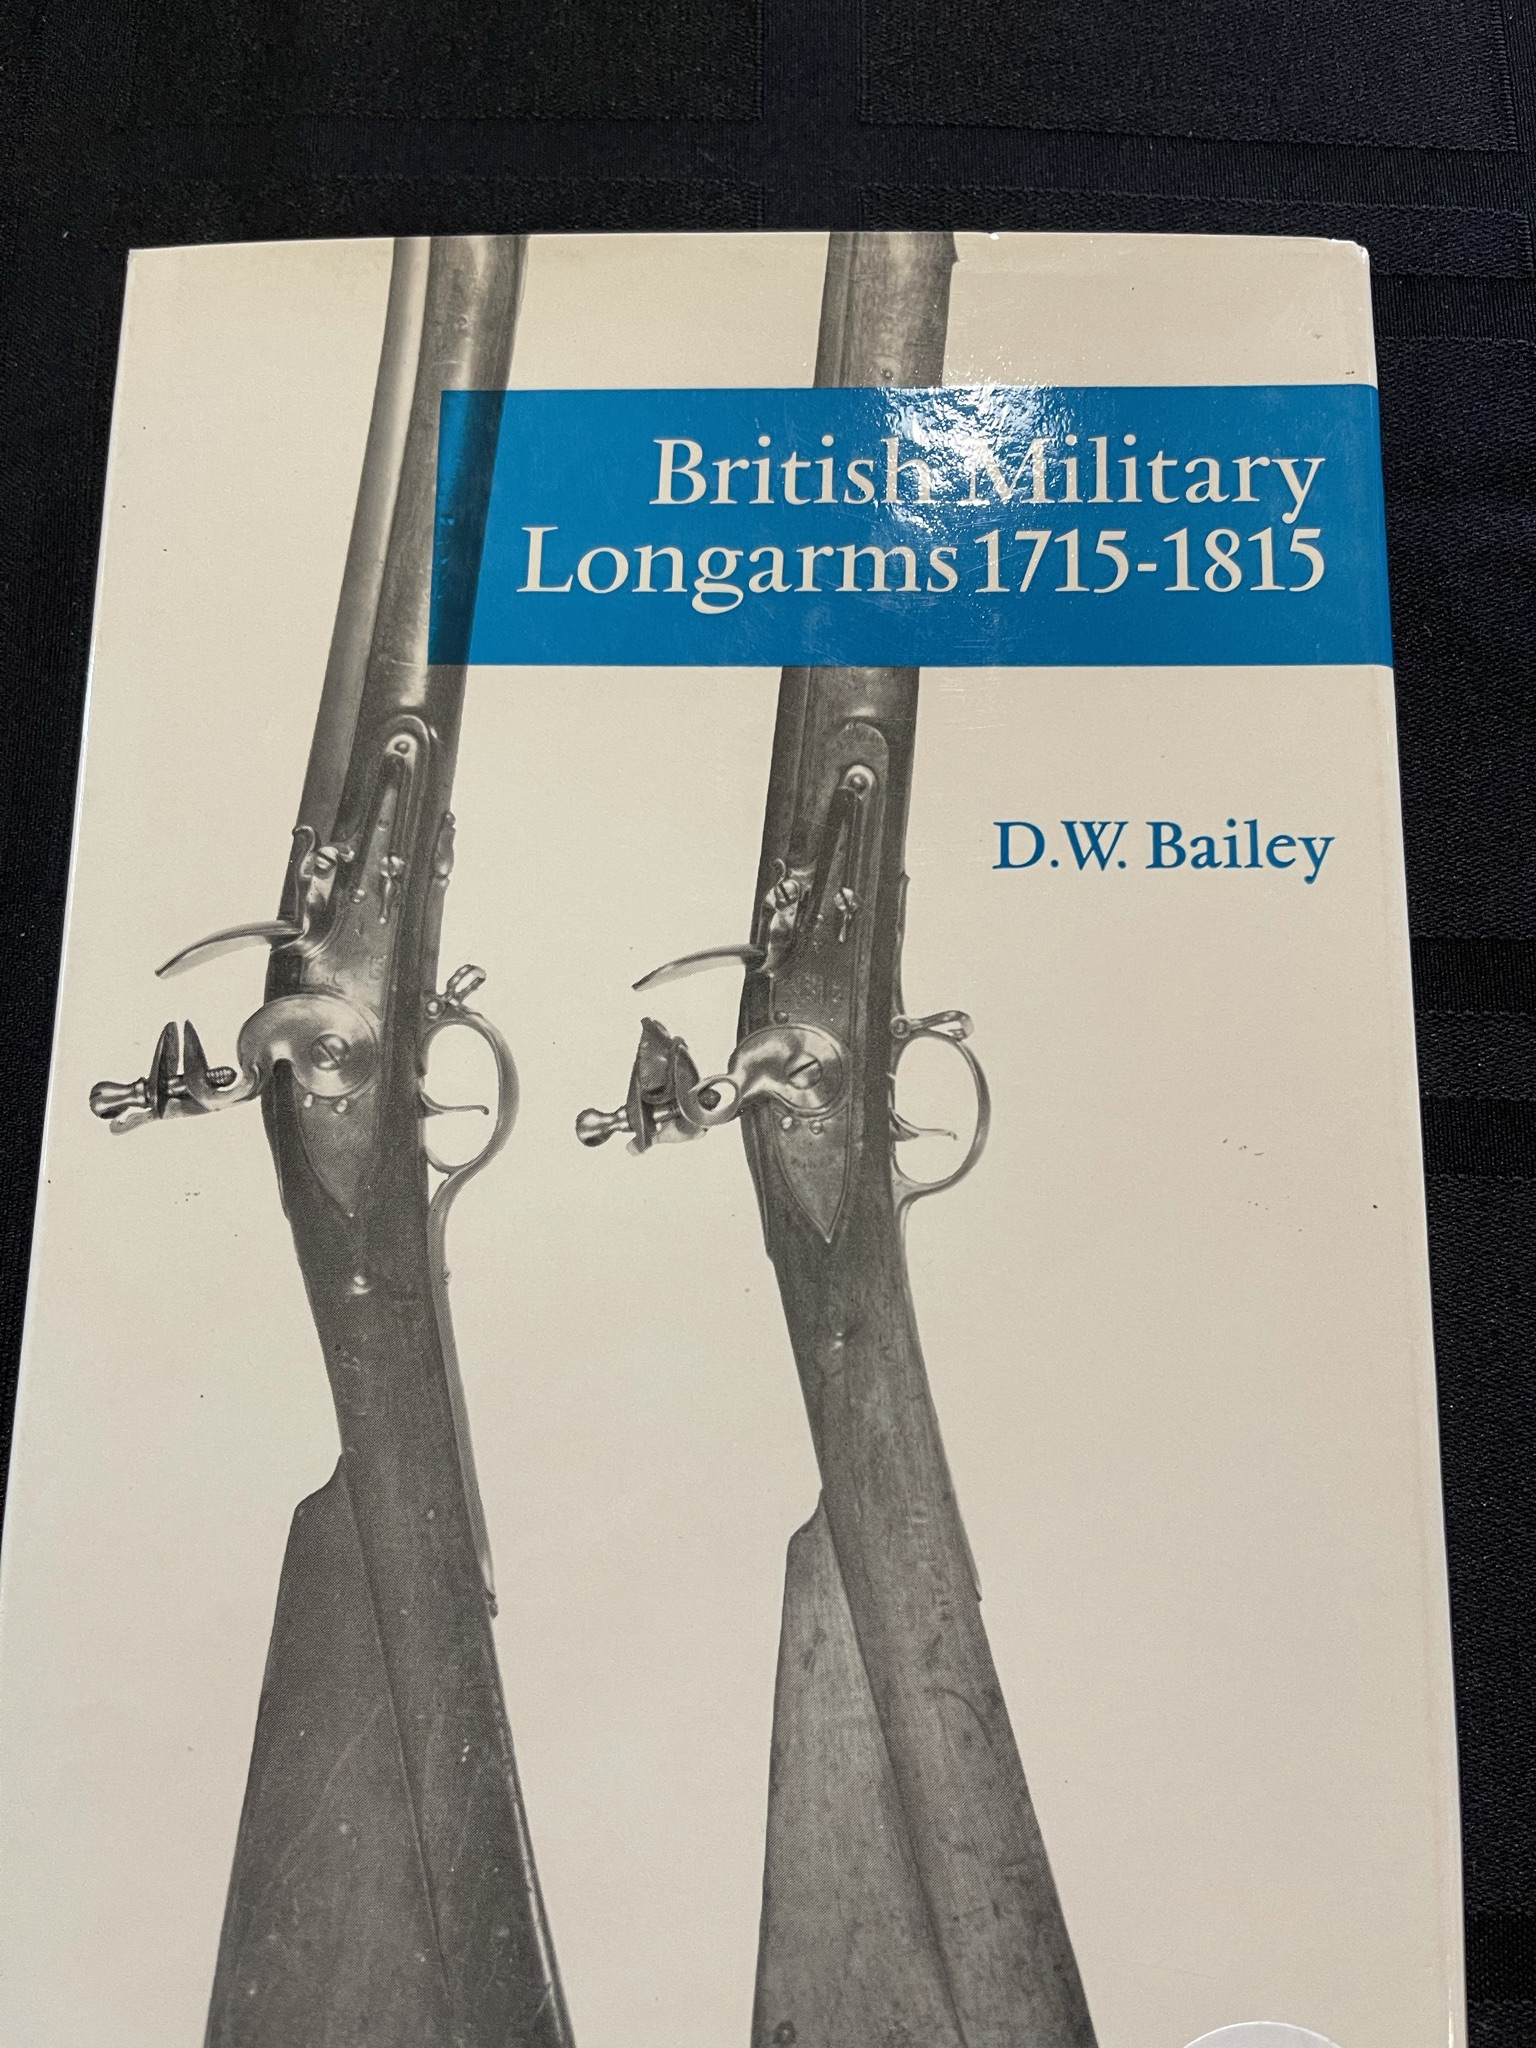 Featured image for “British Military Long Arms”